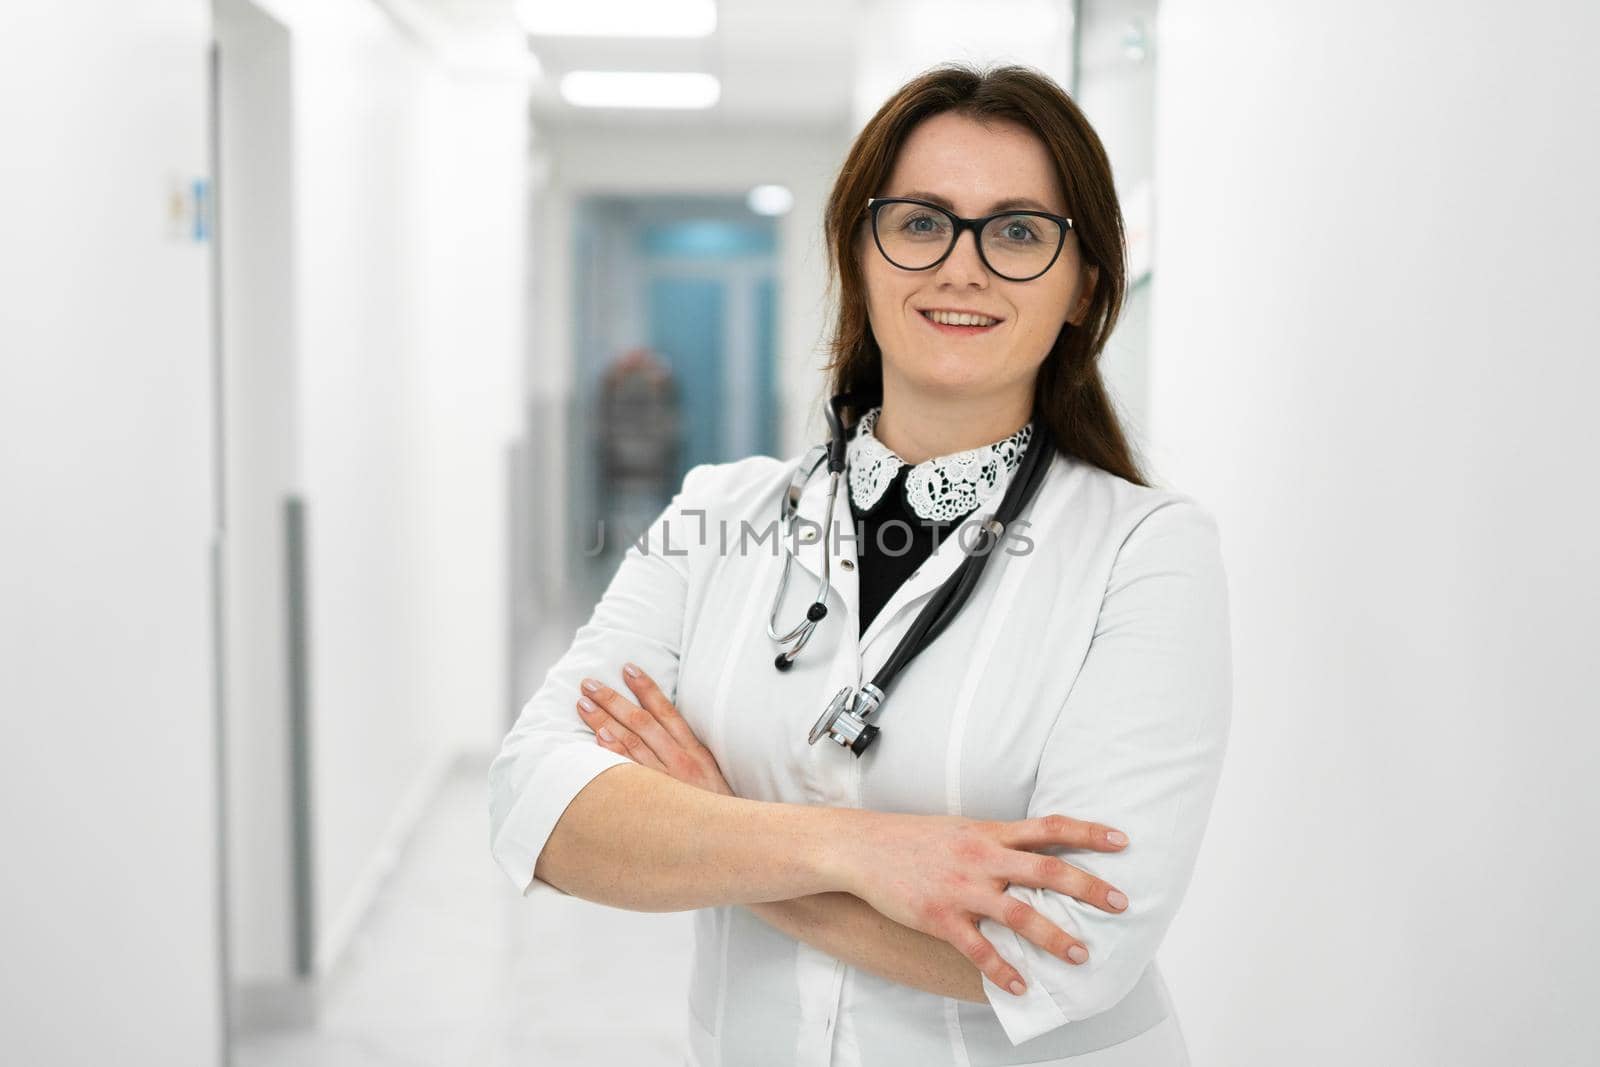 Female doctor standing in hospital corridor. Portrait of a young woman doctor in glasses and a white coat posing in a modern clinic. Proud professional woman doctor therapist looking at camera by Tomashevska